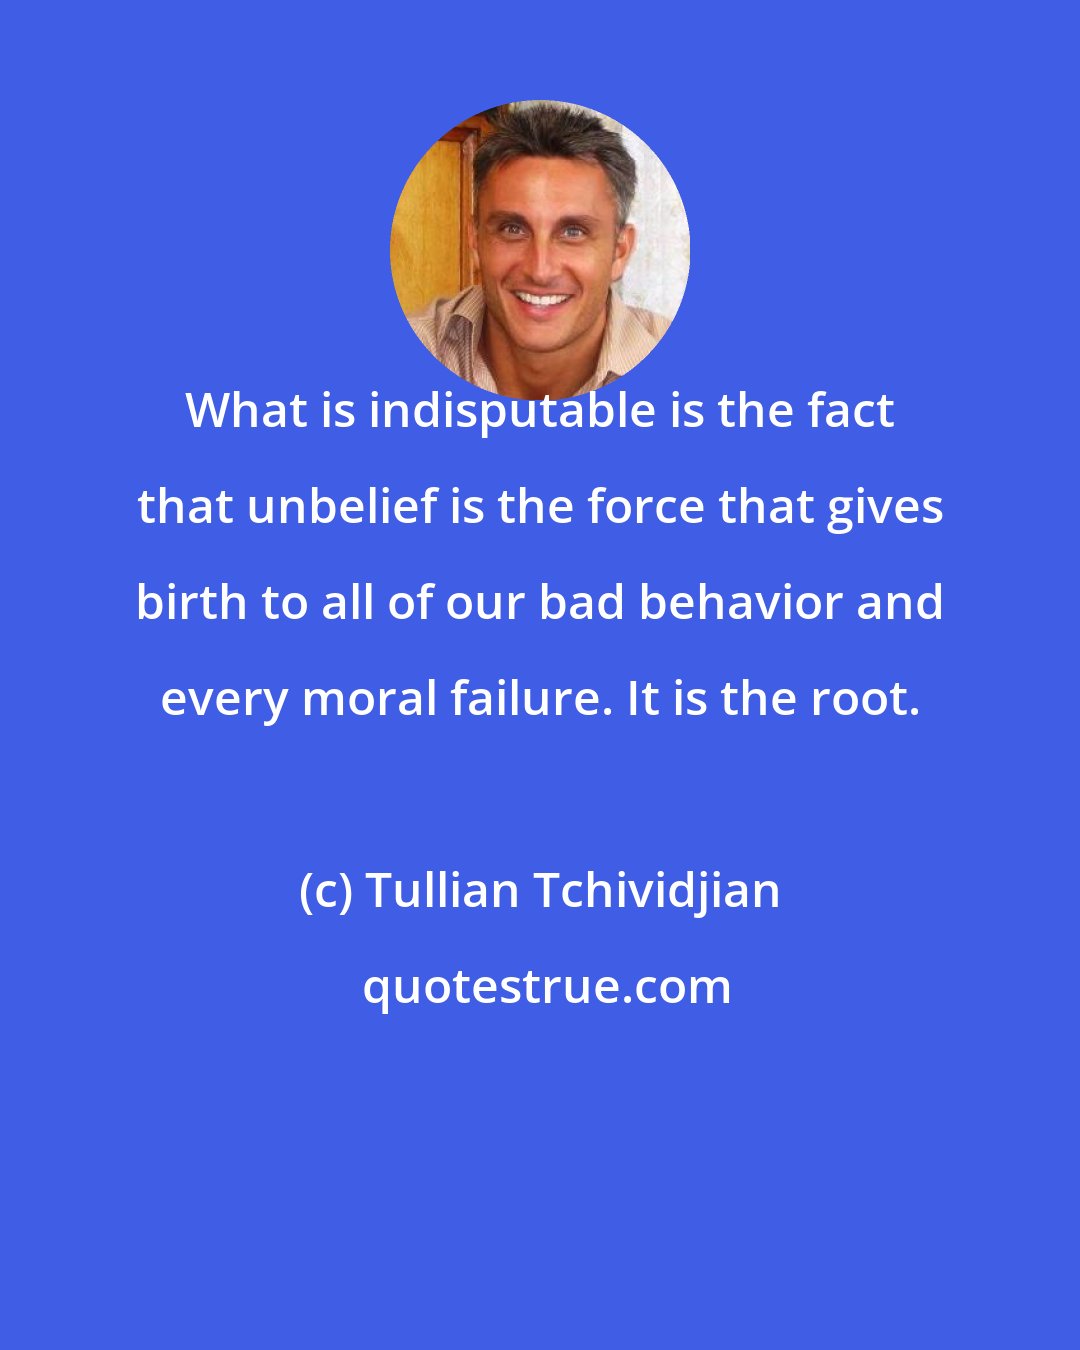 Tullian Tchividjian: What is indisputable is the fact that unbelief is the force that gives birth to all of our bad behavior and every moral failure. It is the root.